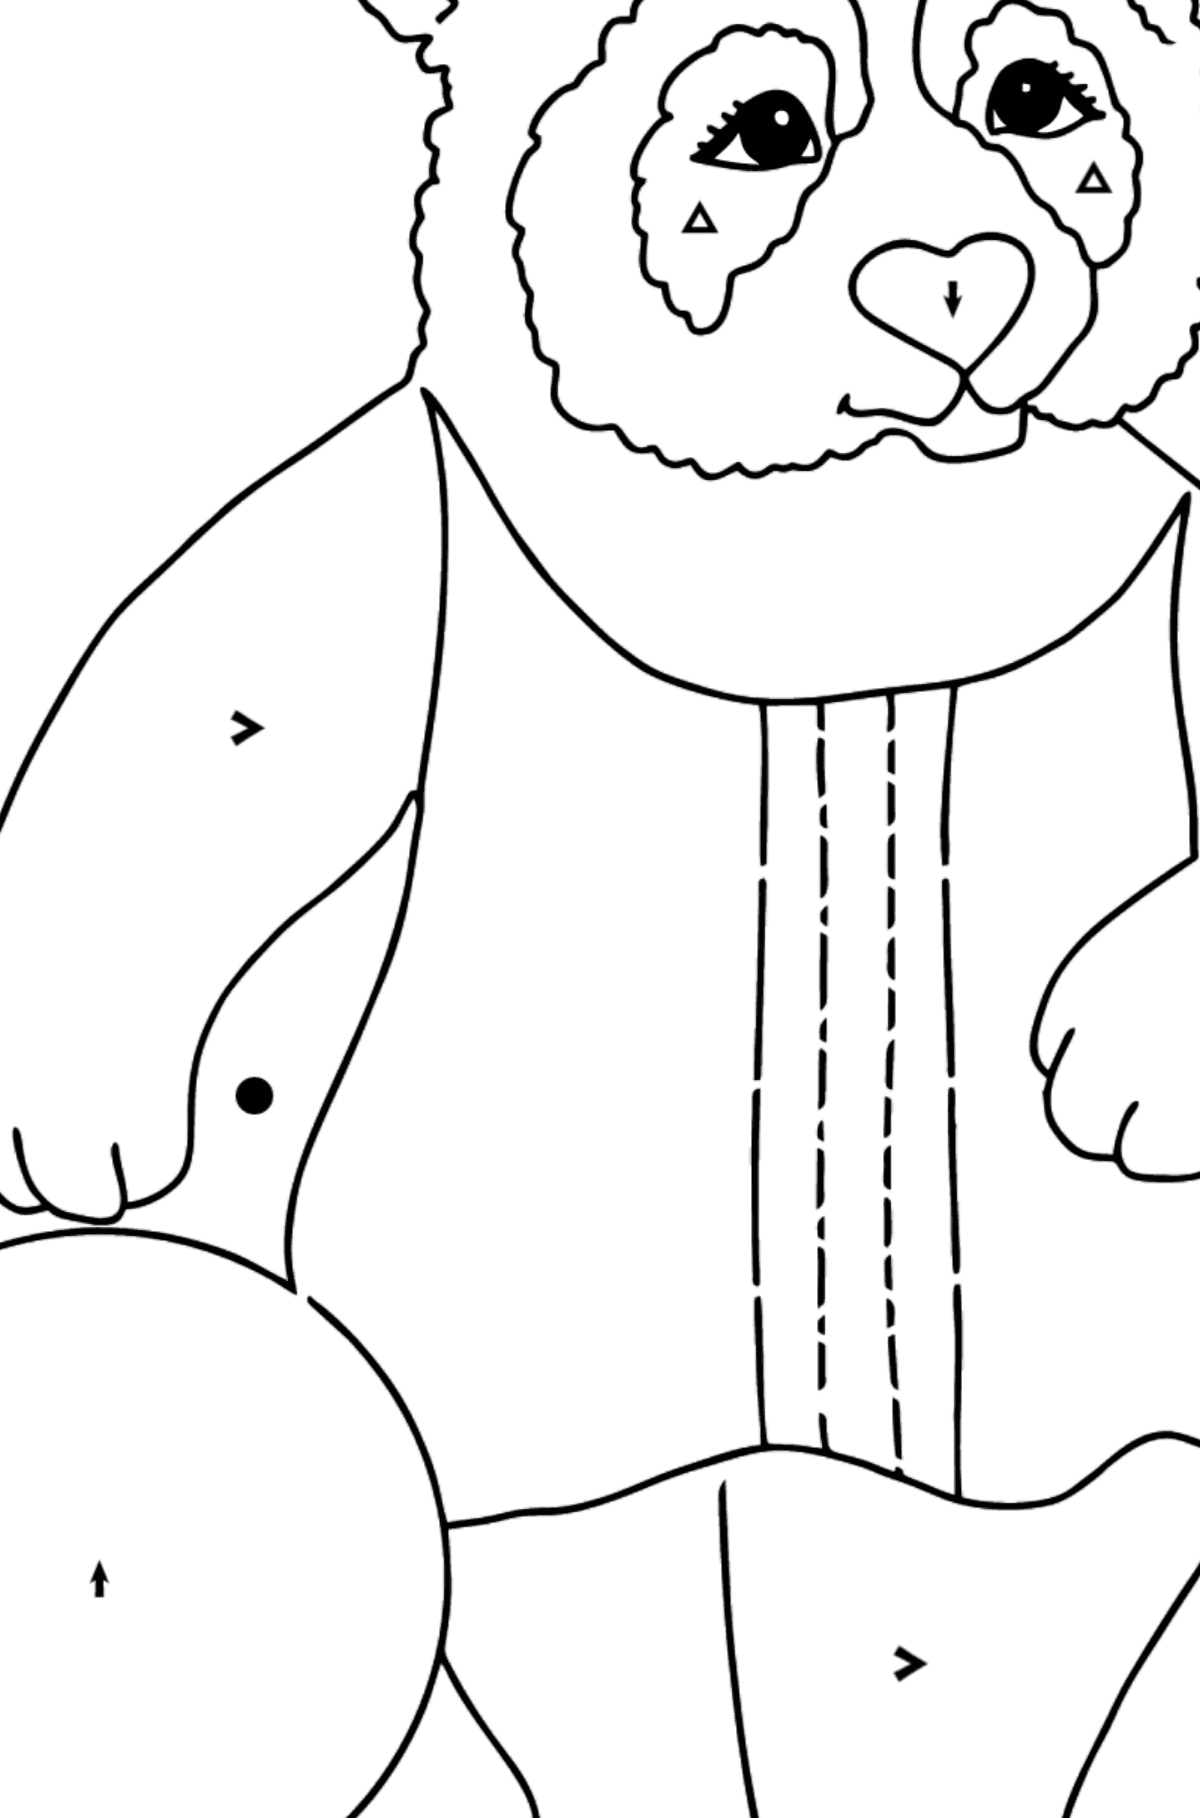 Panda For Babies (Simple) coloring page - Coloring by Symbols for Kids